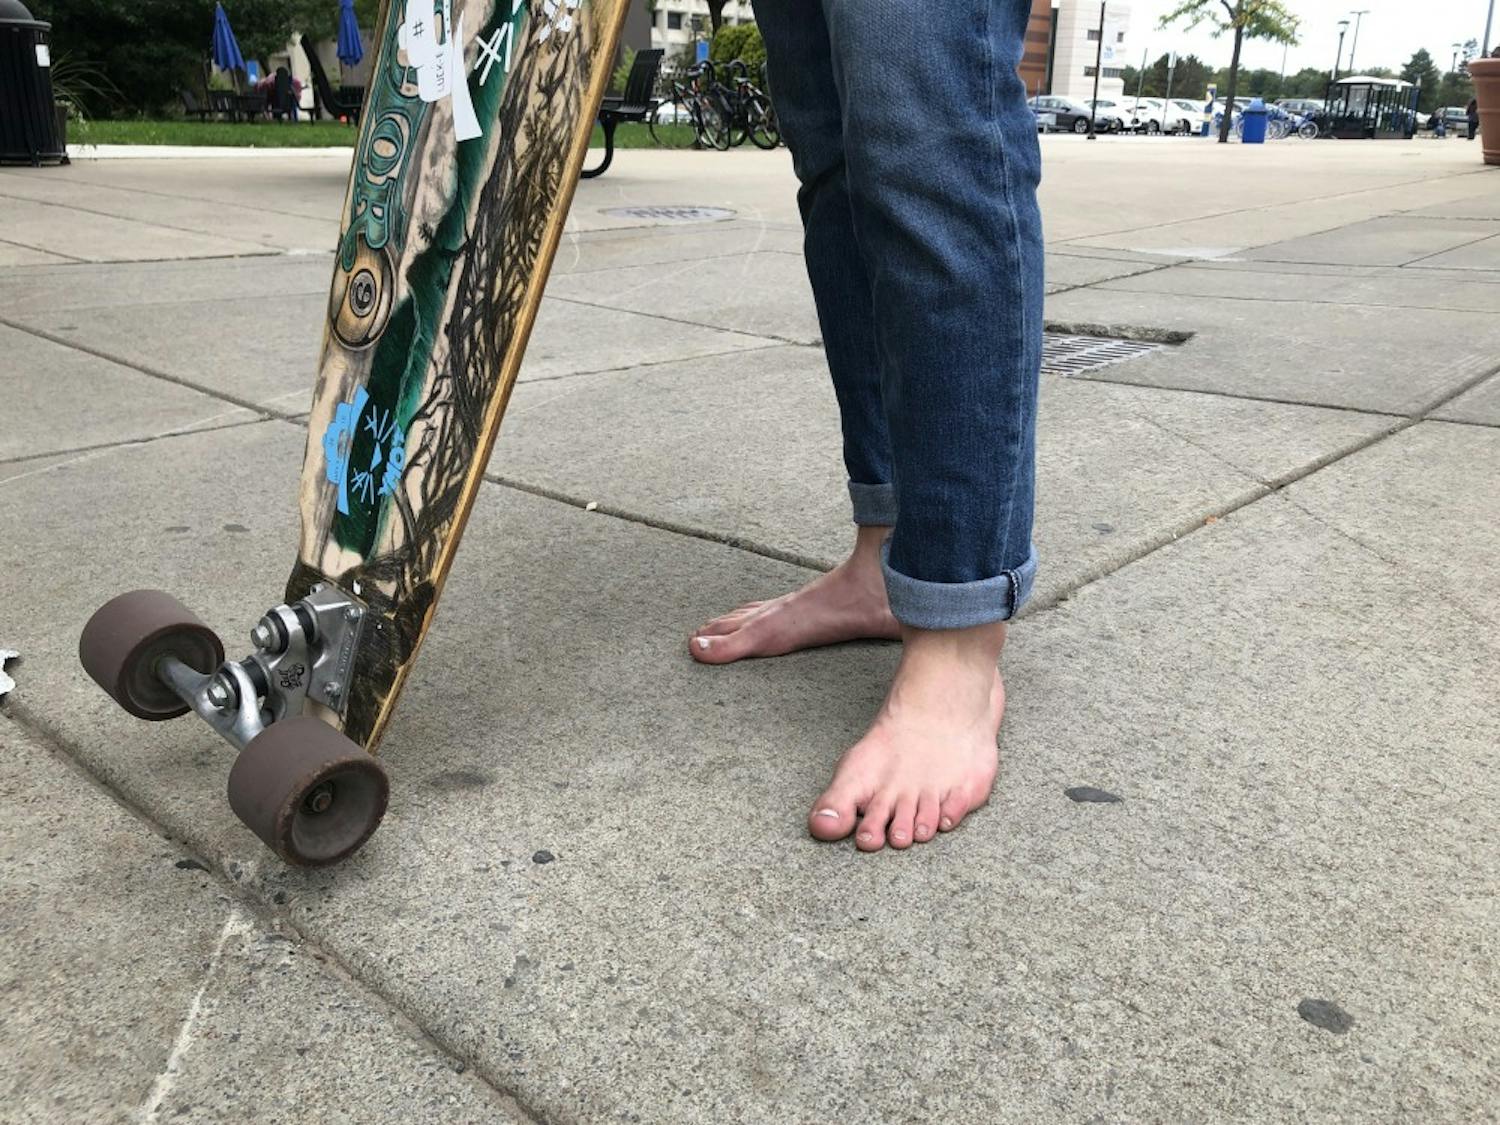 Romanyk, who stopped wearing shoes at the beginning of the semester after noticing another student riding his longboard without shoes, says going barefoot empowers him by helping "build his toughness."